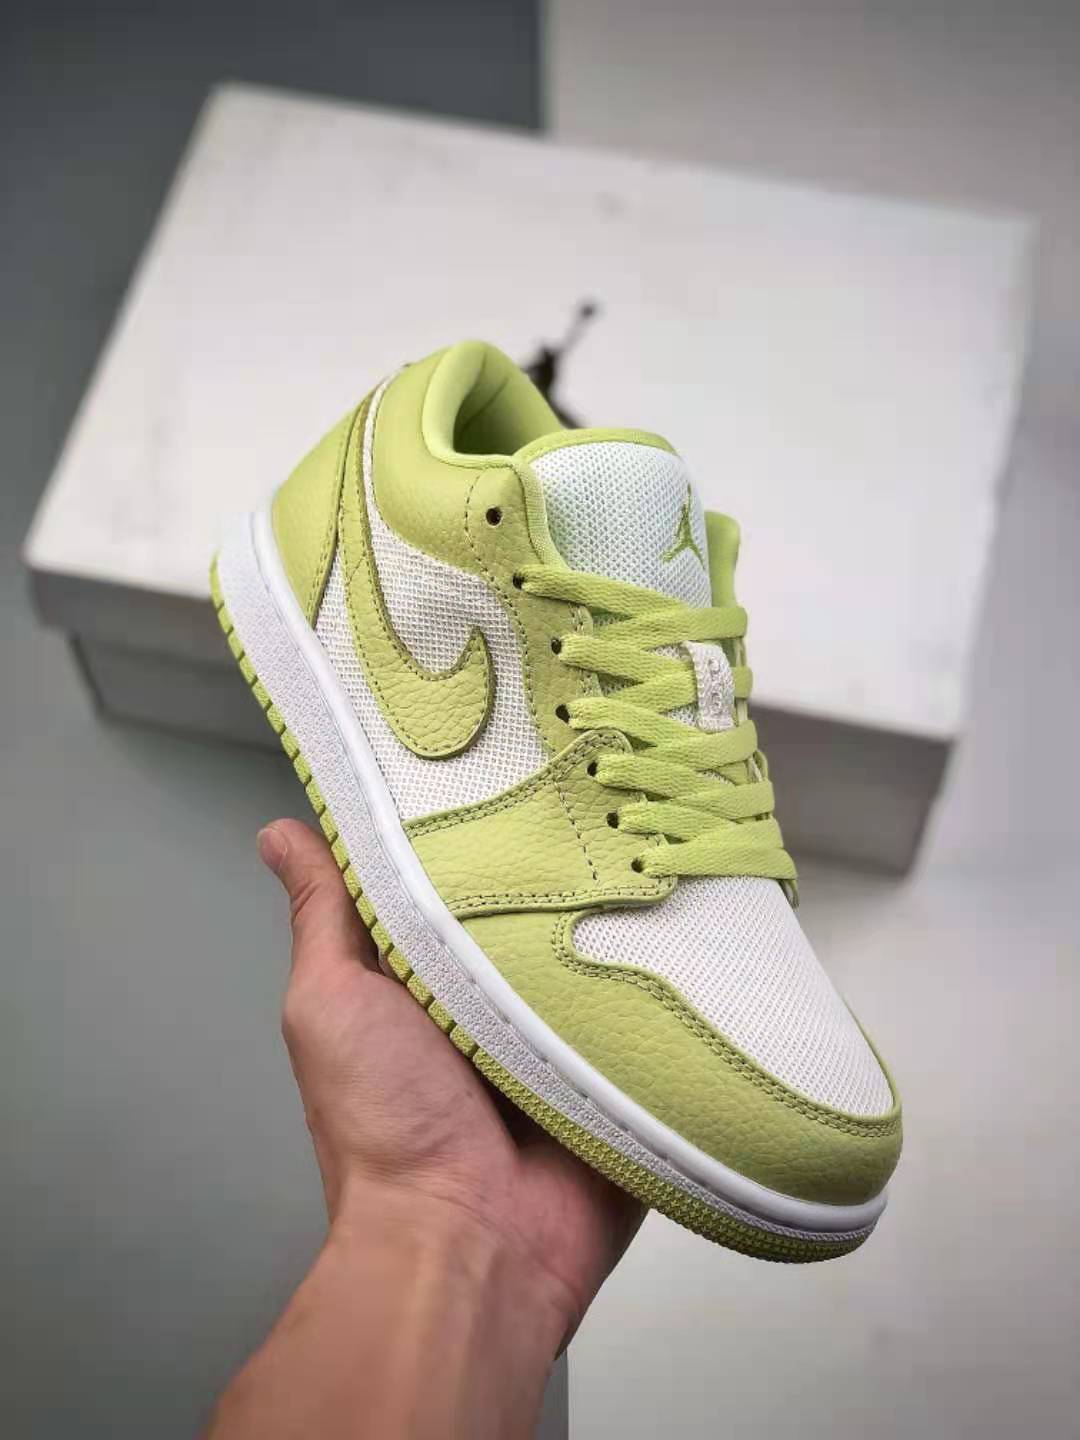 Air Jordan 1 Low 'Limelight' DH9619-103 - Classic Styling with a Vibrant Twist